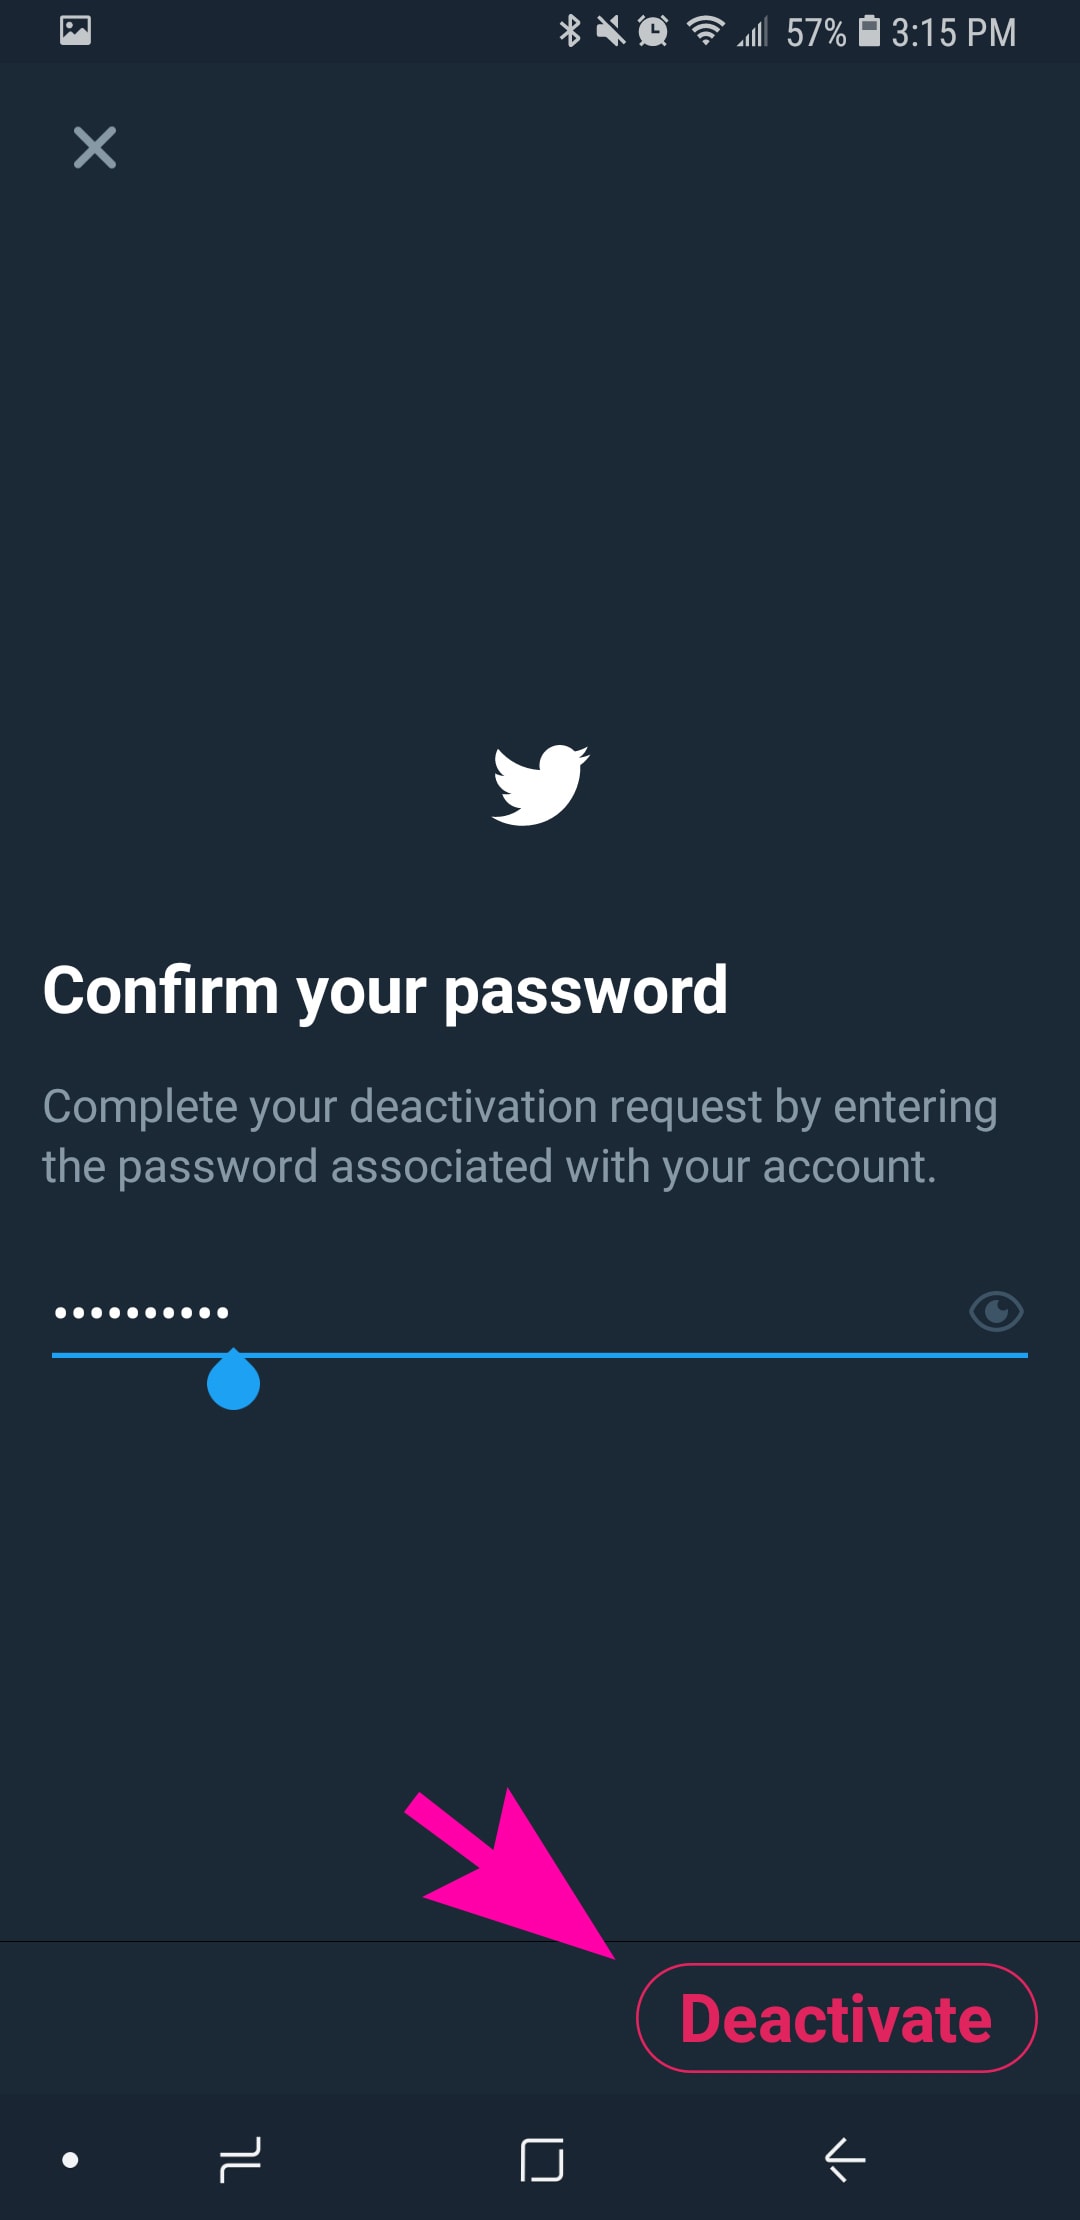 How to delete a Twitter account or deactivate it in 23